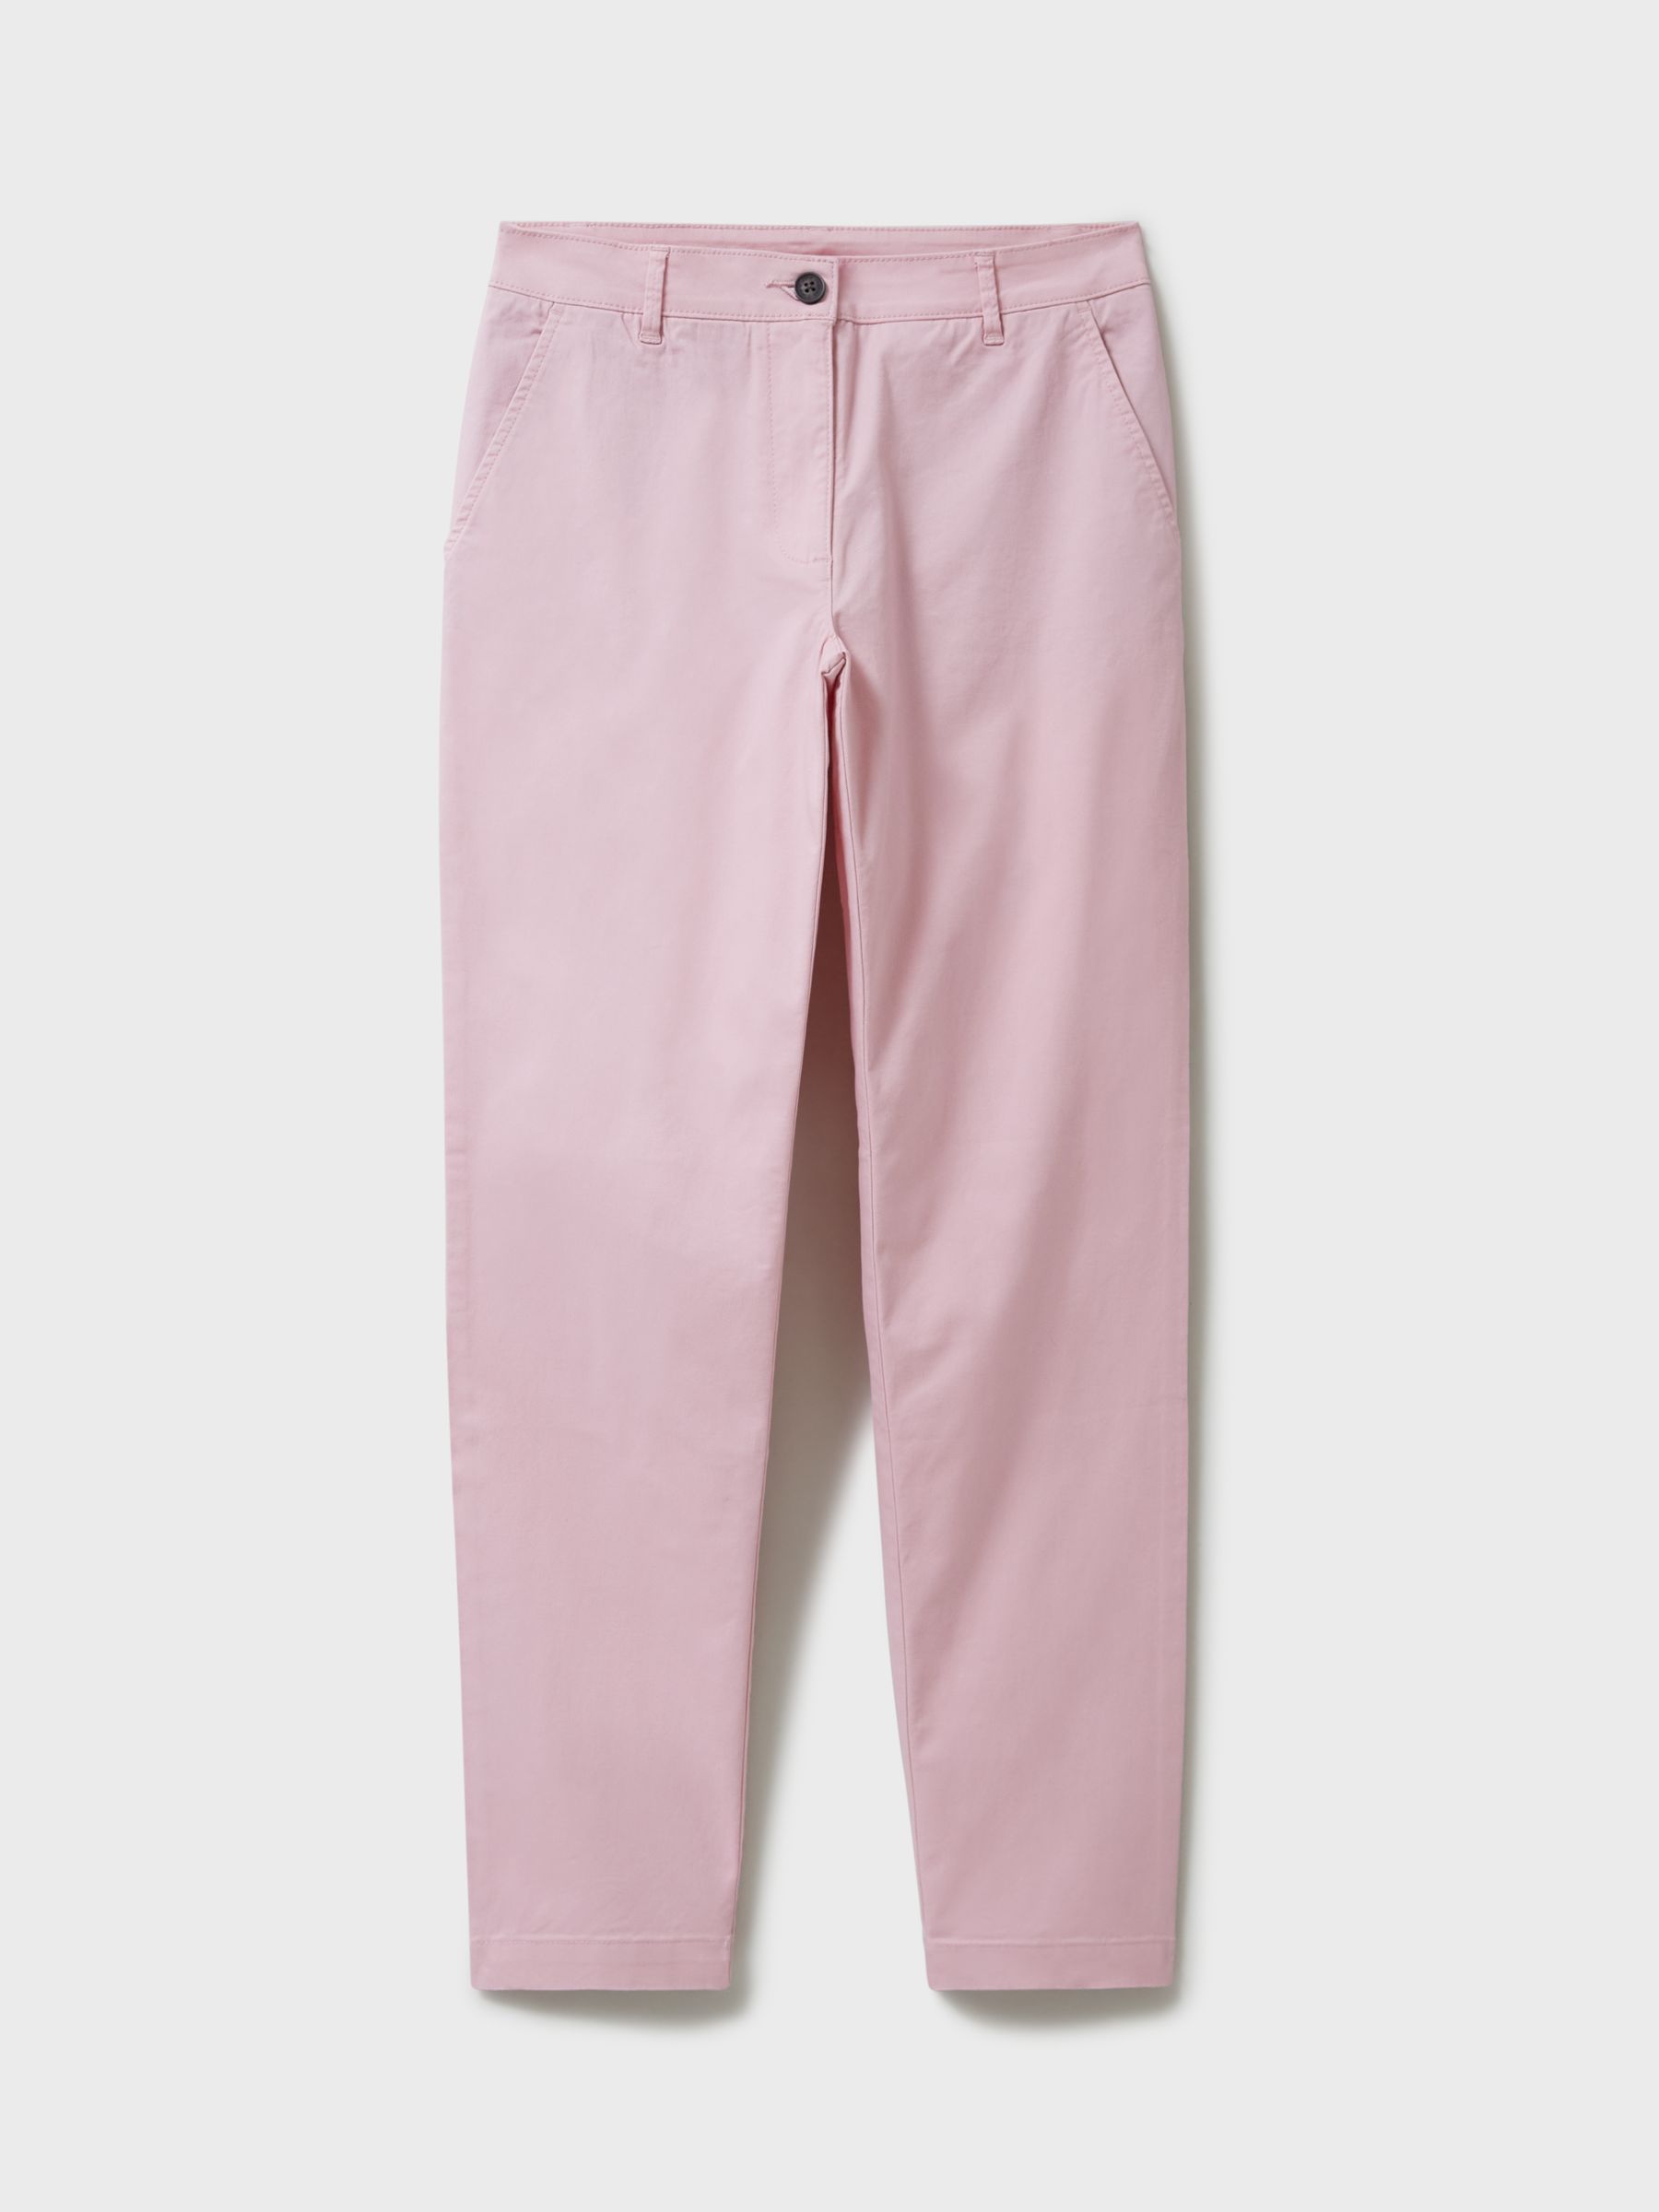 Crew Clothing Classic Cotton Blend Chinos, Light Pink, 16